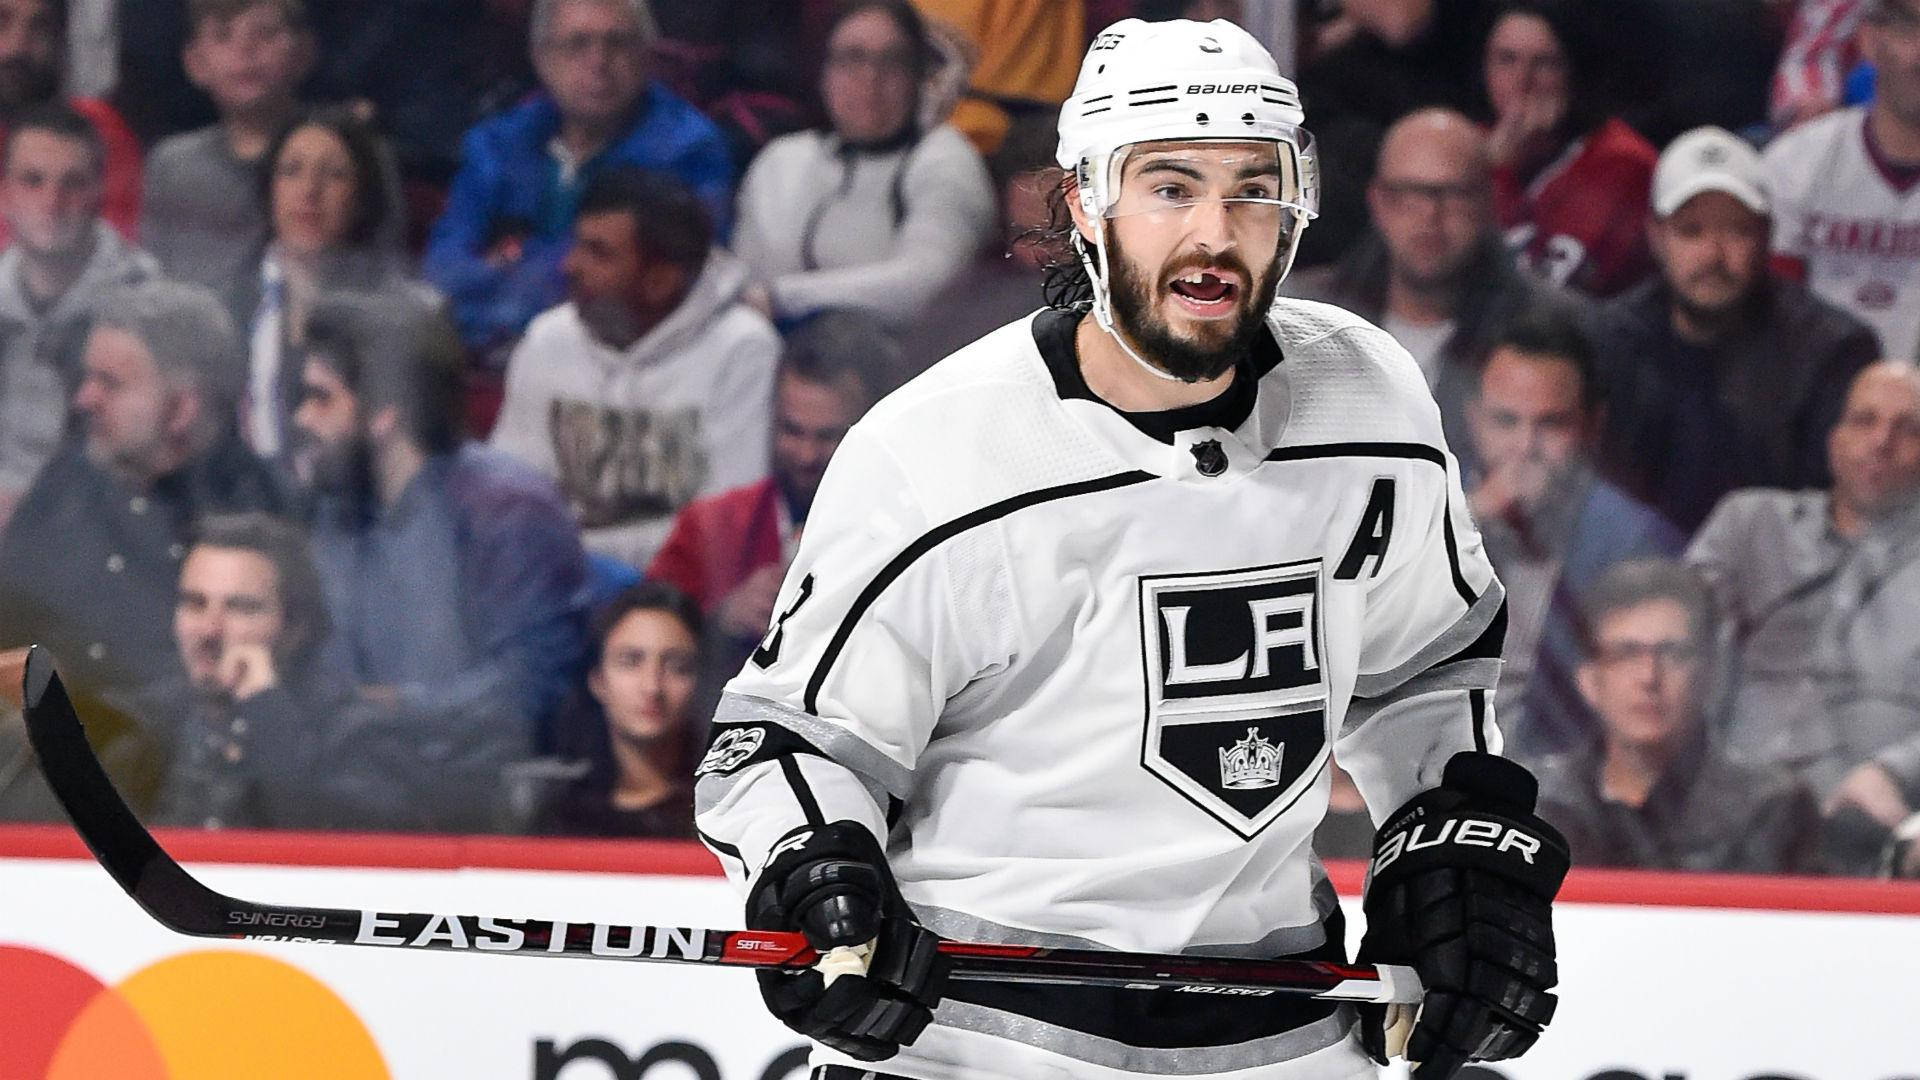 Drew Doughty With Mouth Open During Game Wallpaper